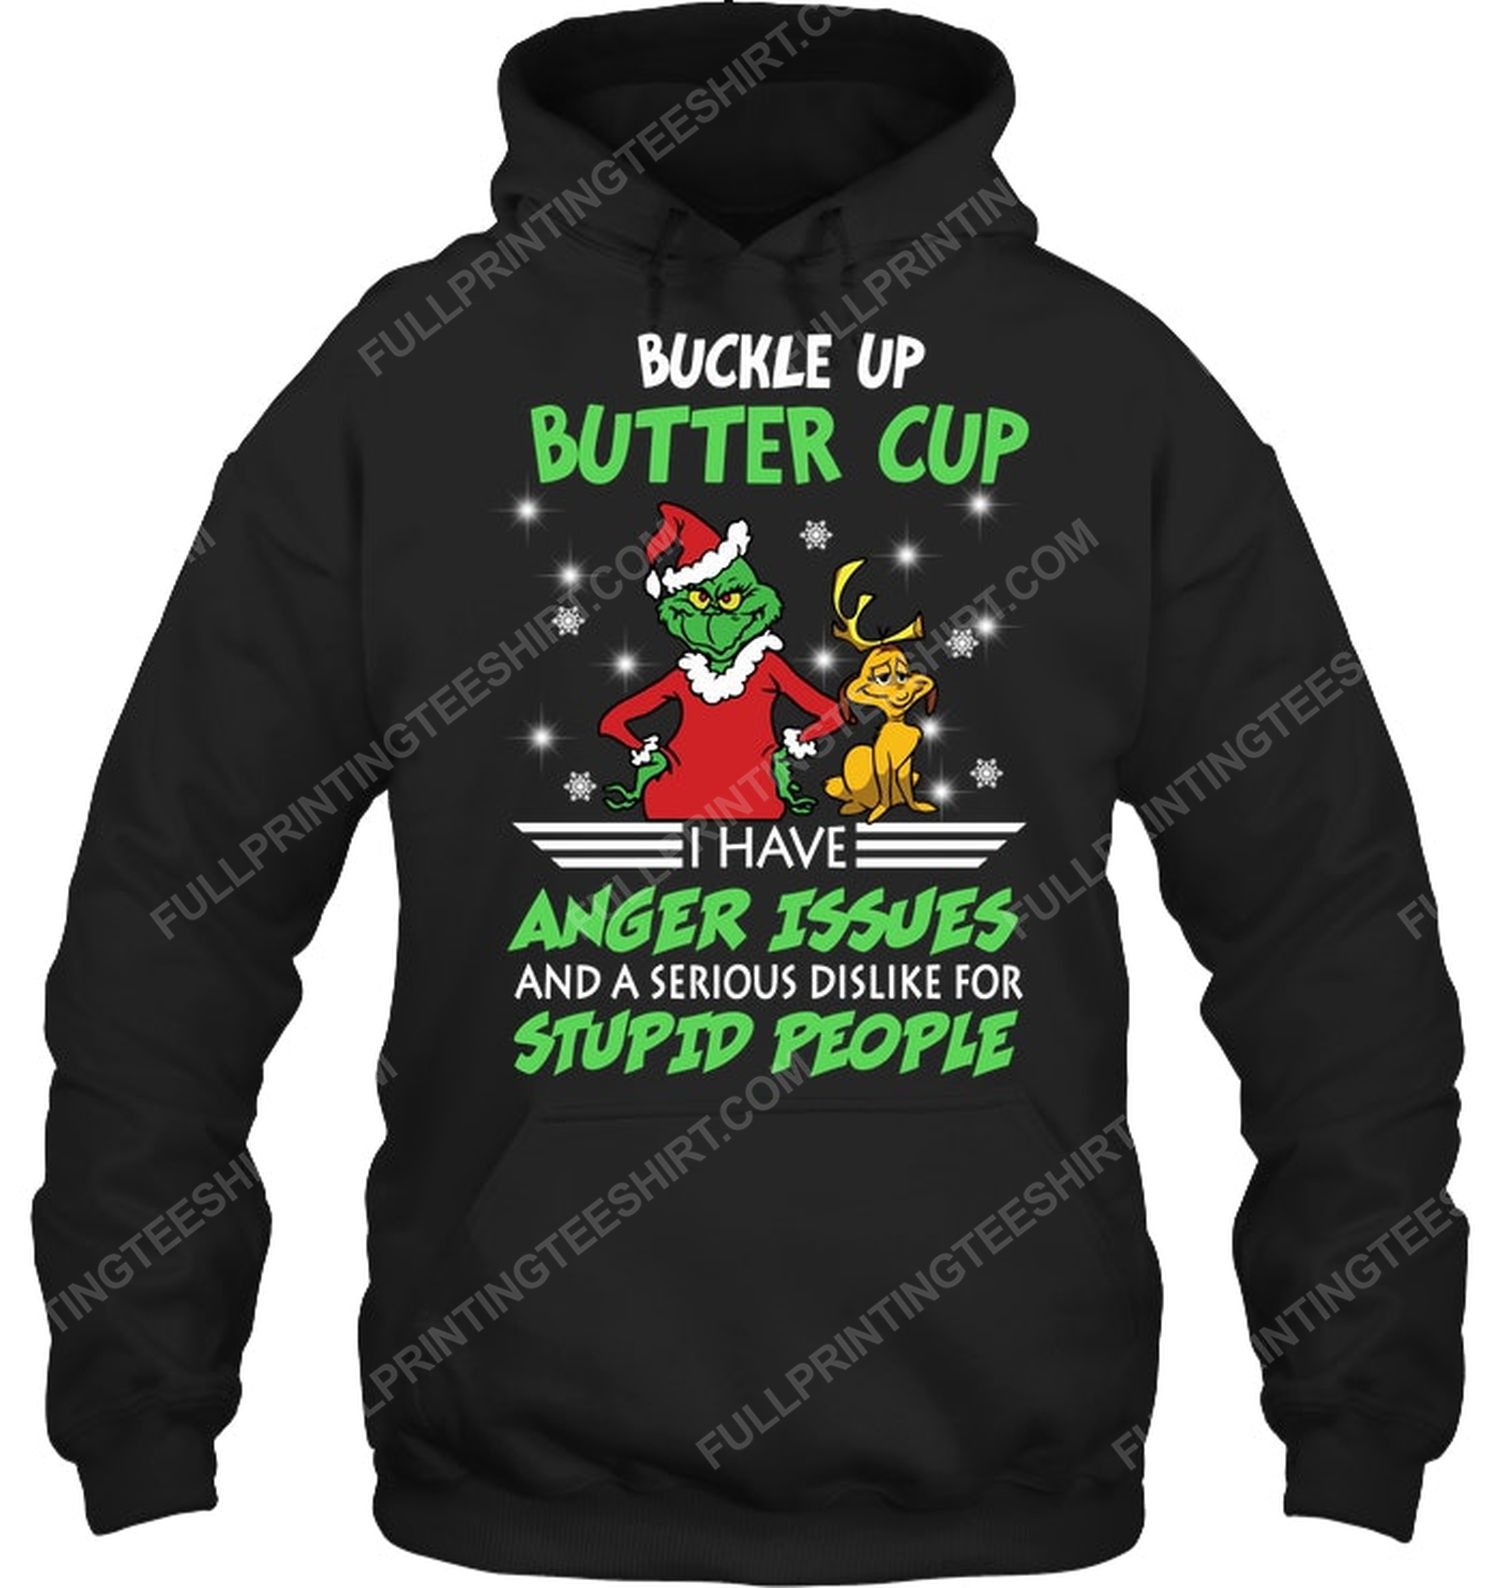 The grinch buckle the grinch up buttercup i have anger issues and a serious dislike for stupid people hoodie